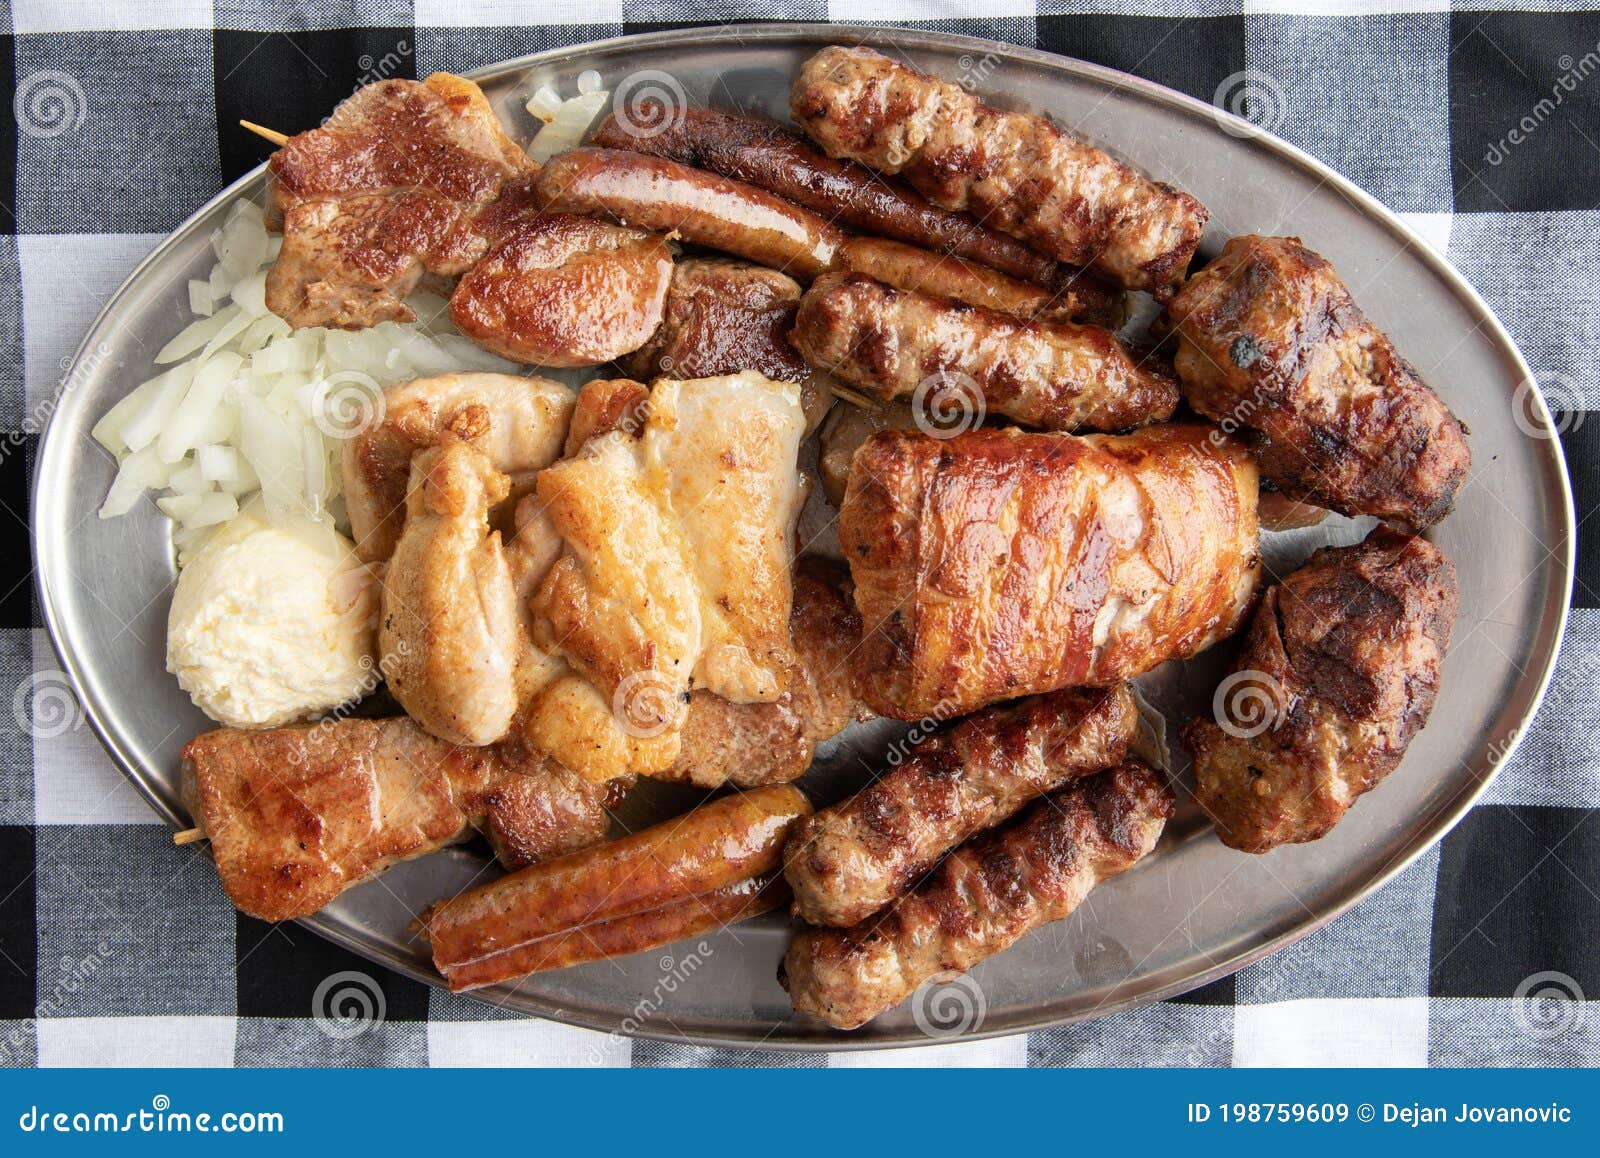 traditional serbian mix of the grilled meat - mesano meso leskovacki voz